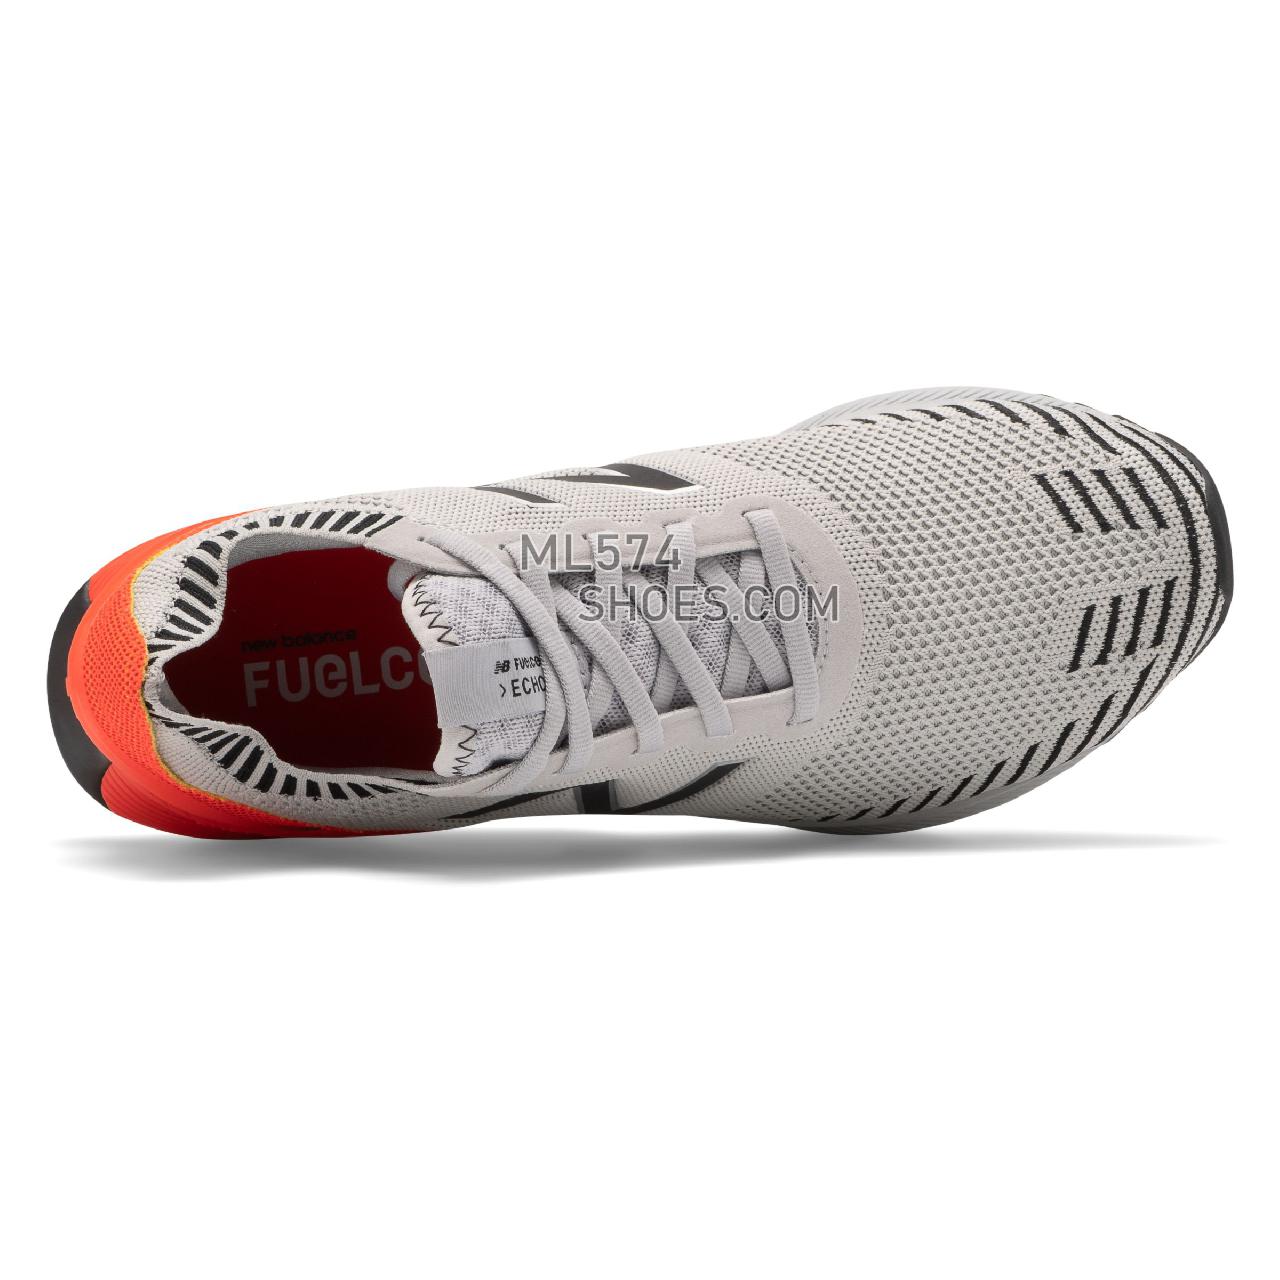 New Balance FuelCell Echo - Men's FuelCell Echo Running - Light Aluminum with Neo Flame - MFCECCG